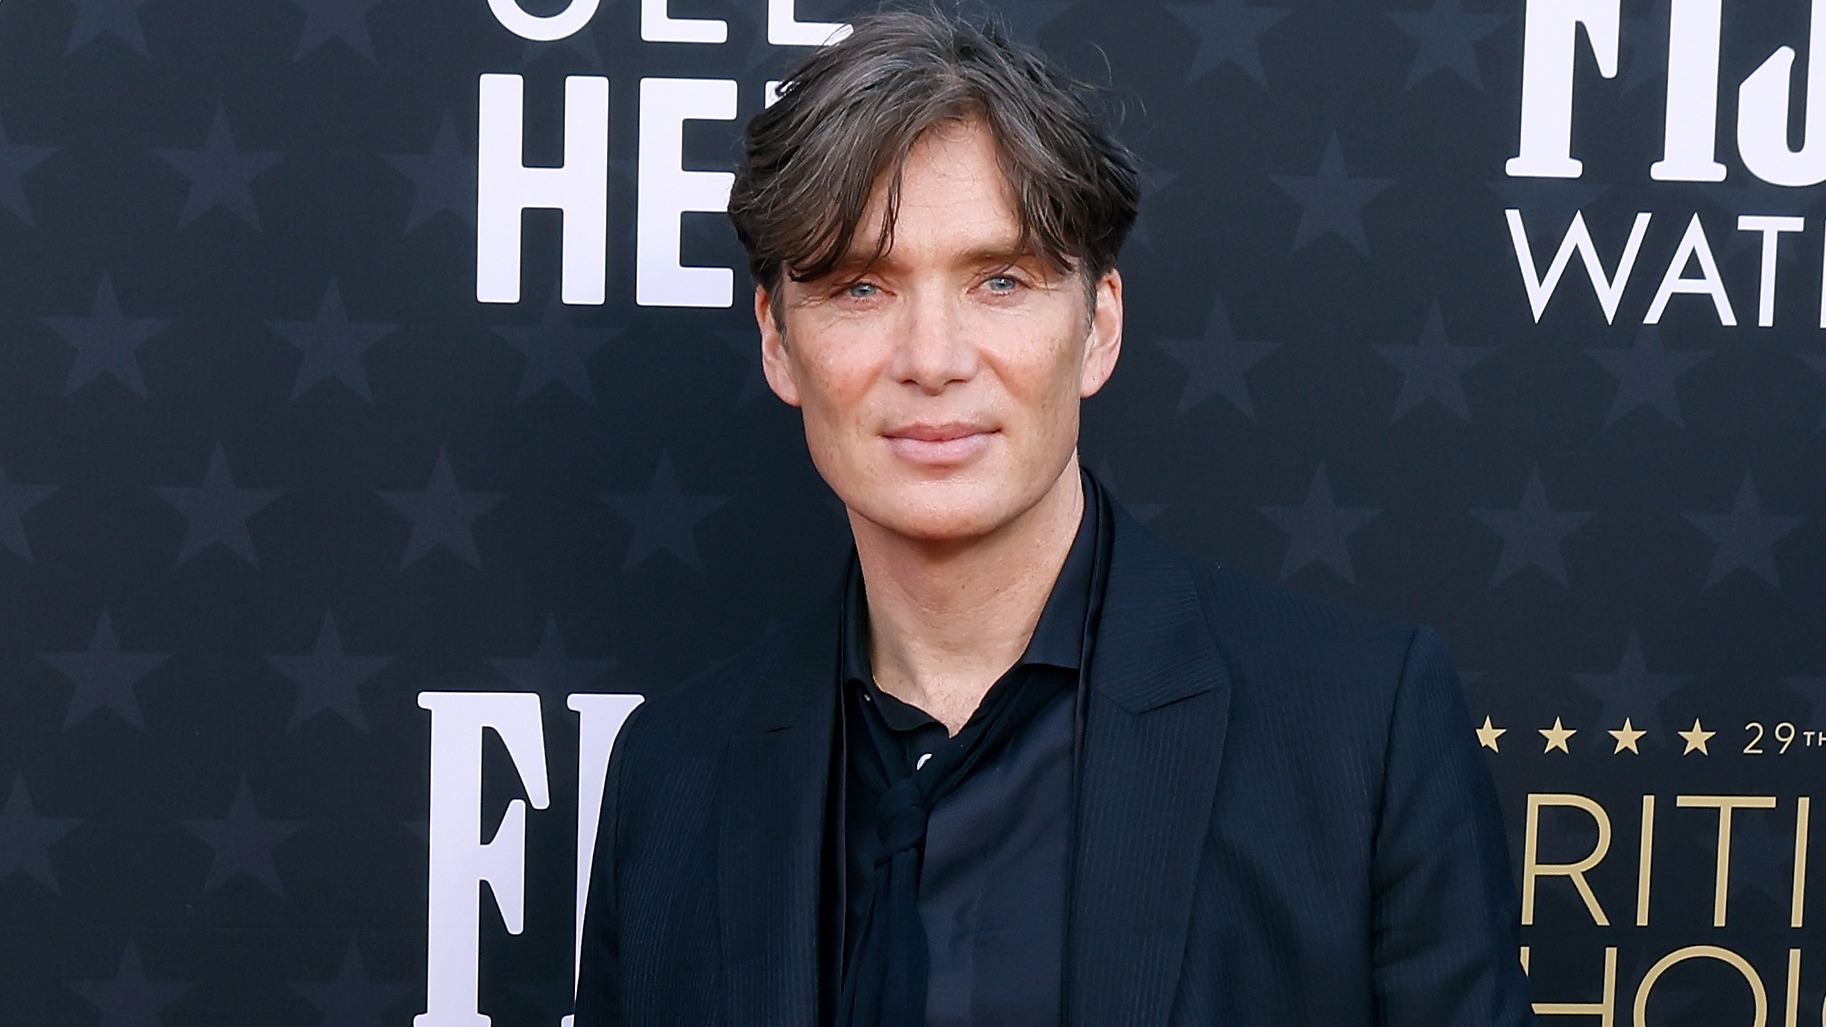 Cillian Murphy S Dad Doesn T Like To Make A Fuss About His Son S